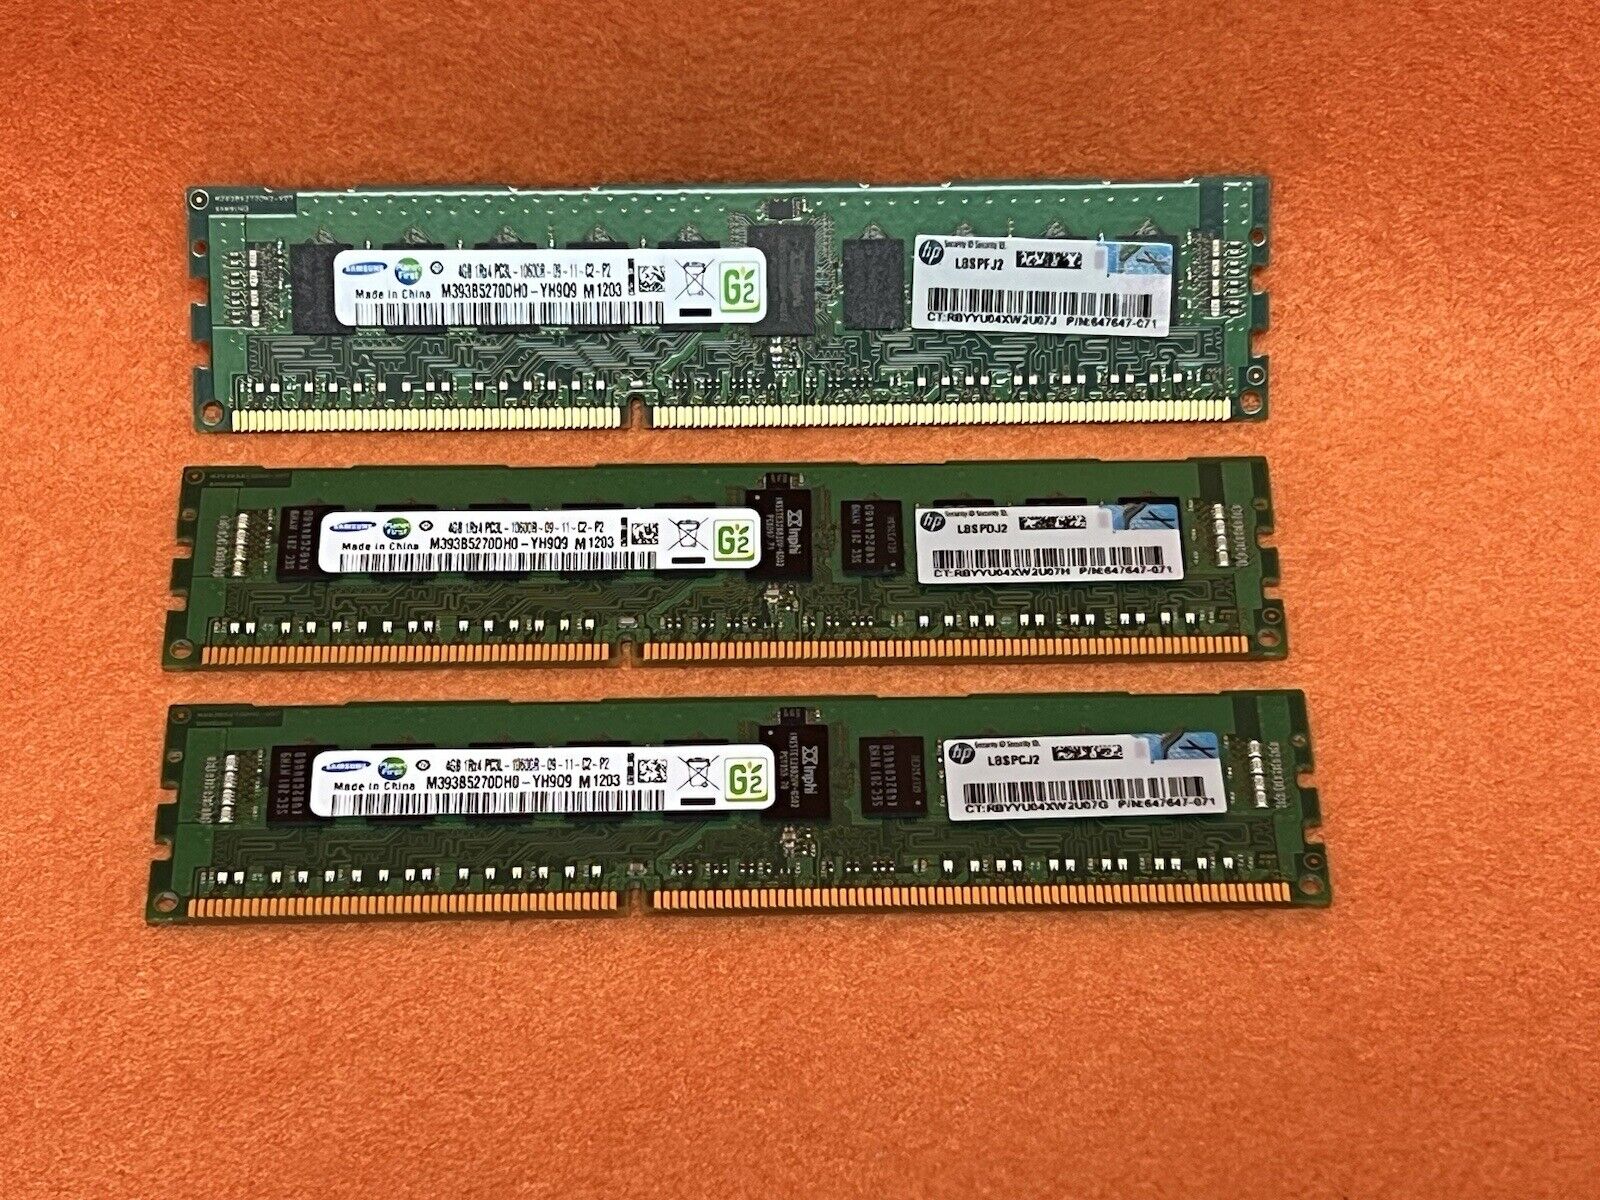 Lot of 3 Samsung 4gb 1RX4 PC3L-10600R M393B5270DH0-YH9Q9 (For Server Only)